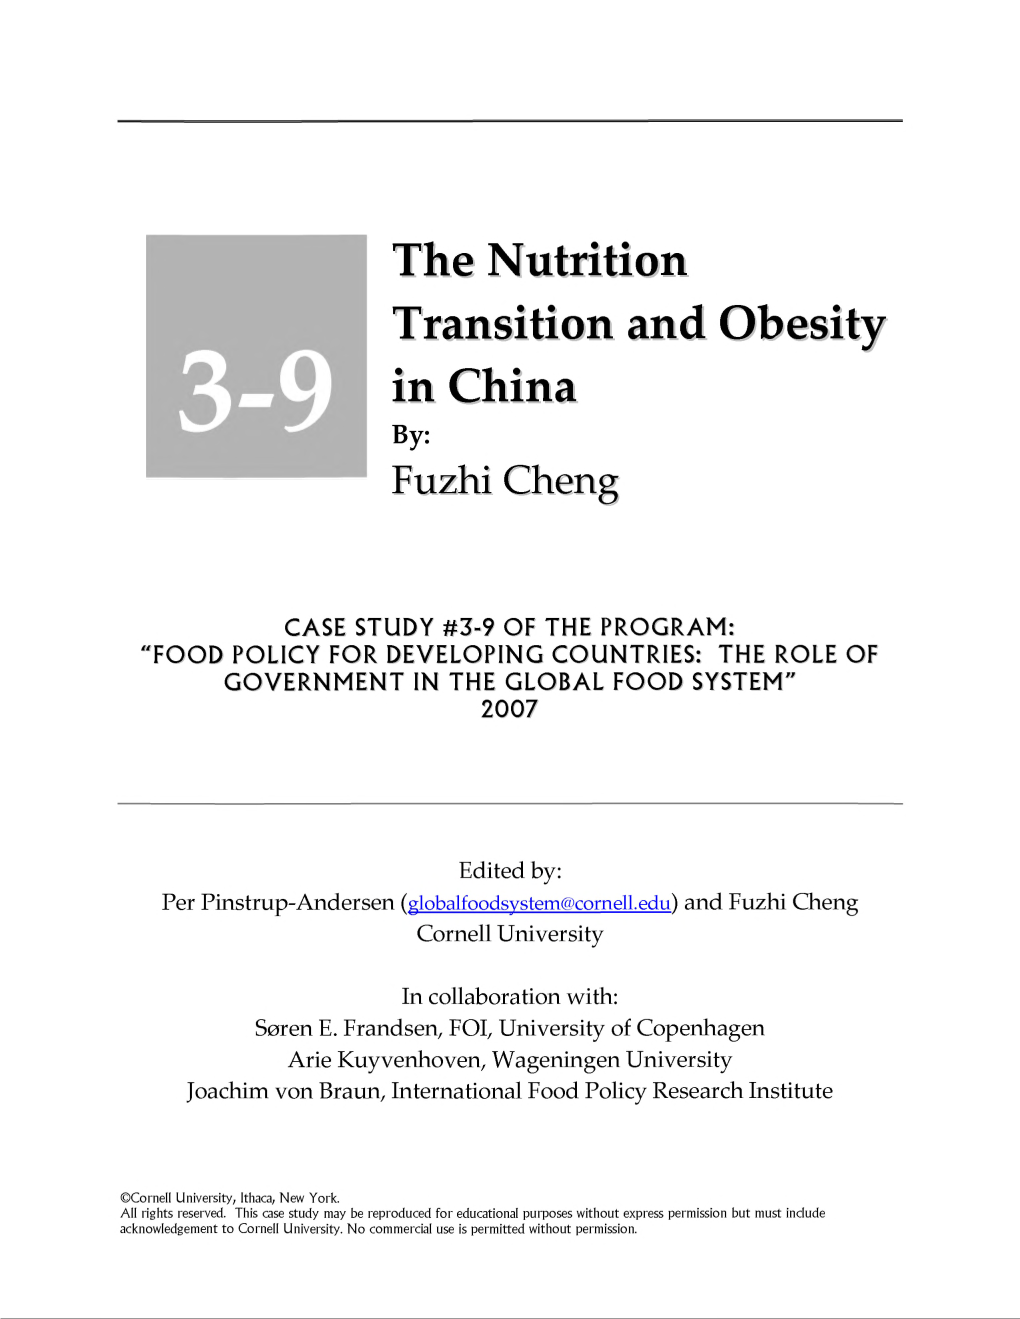 The Nutrition Transition and Obesity in China By: Fuzhi Cheng